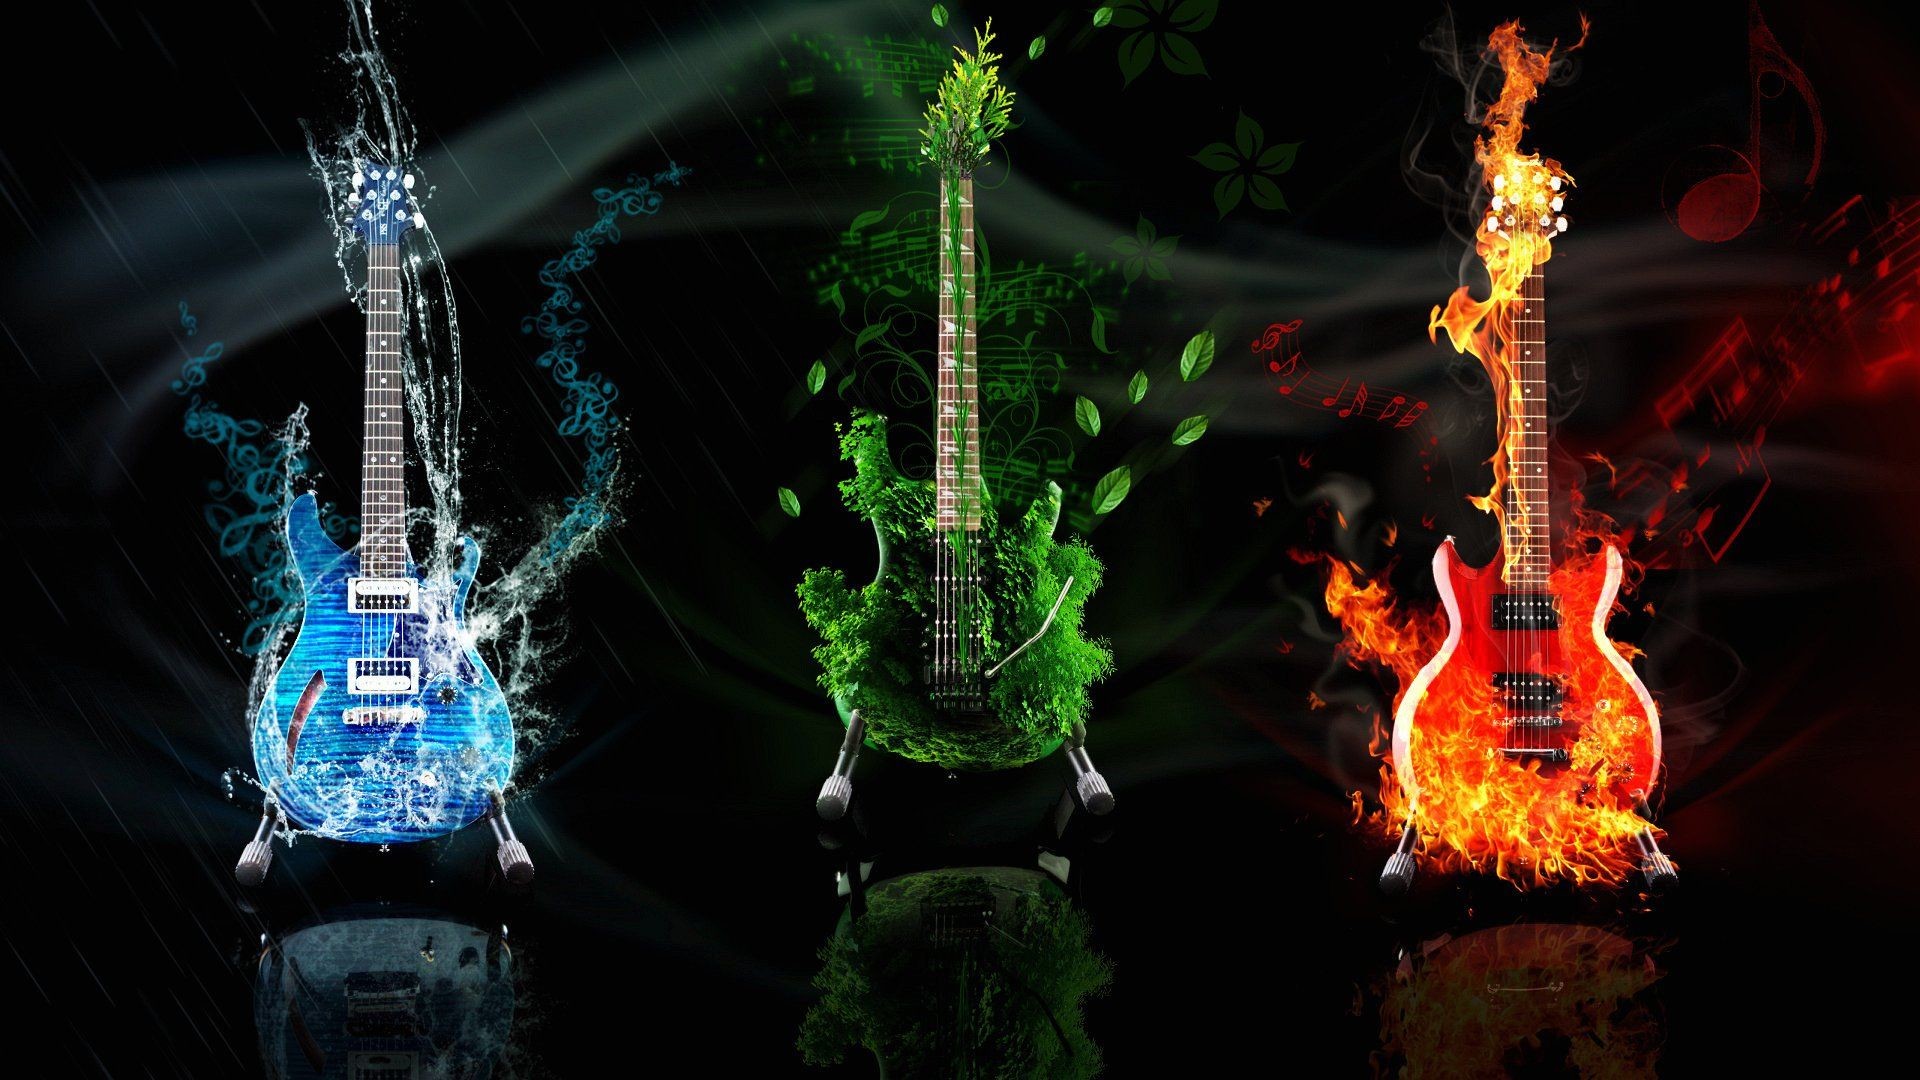 1920x1080 Bass Guitar Wallpapers and Backgrounds 1920 x 1080 | 1080 theme full hd  1920 1080 widescreen type wallpaper for wallpaper .